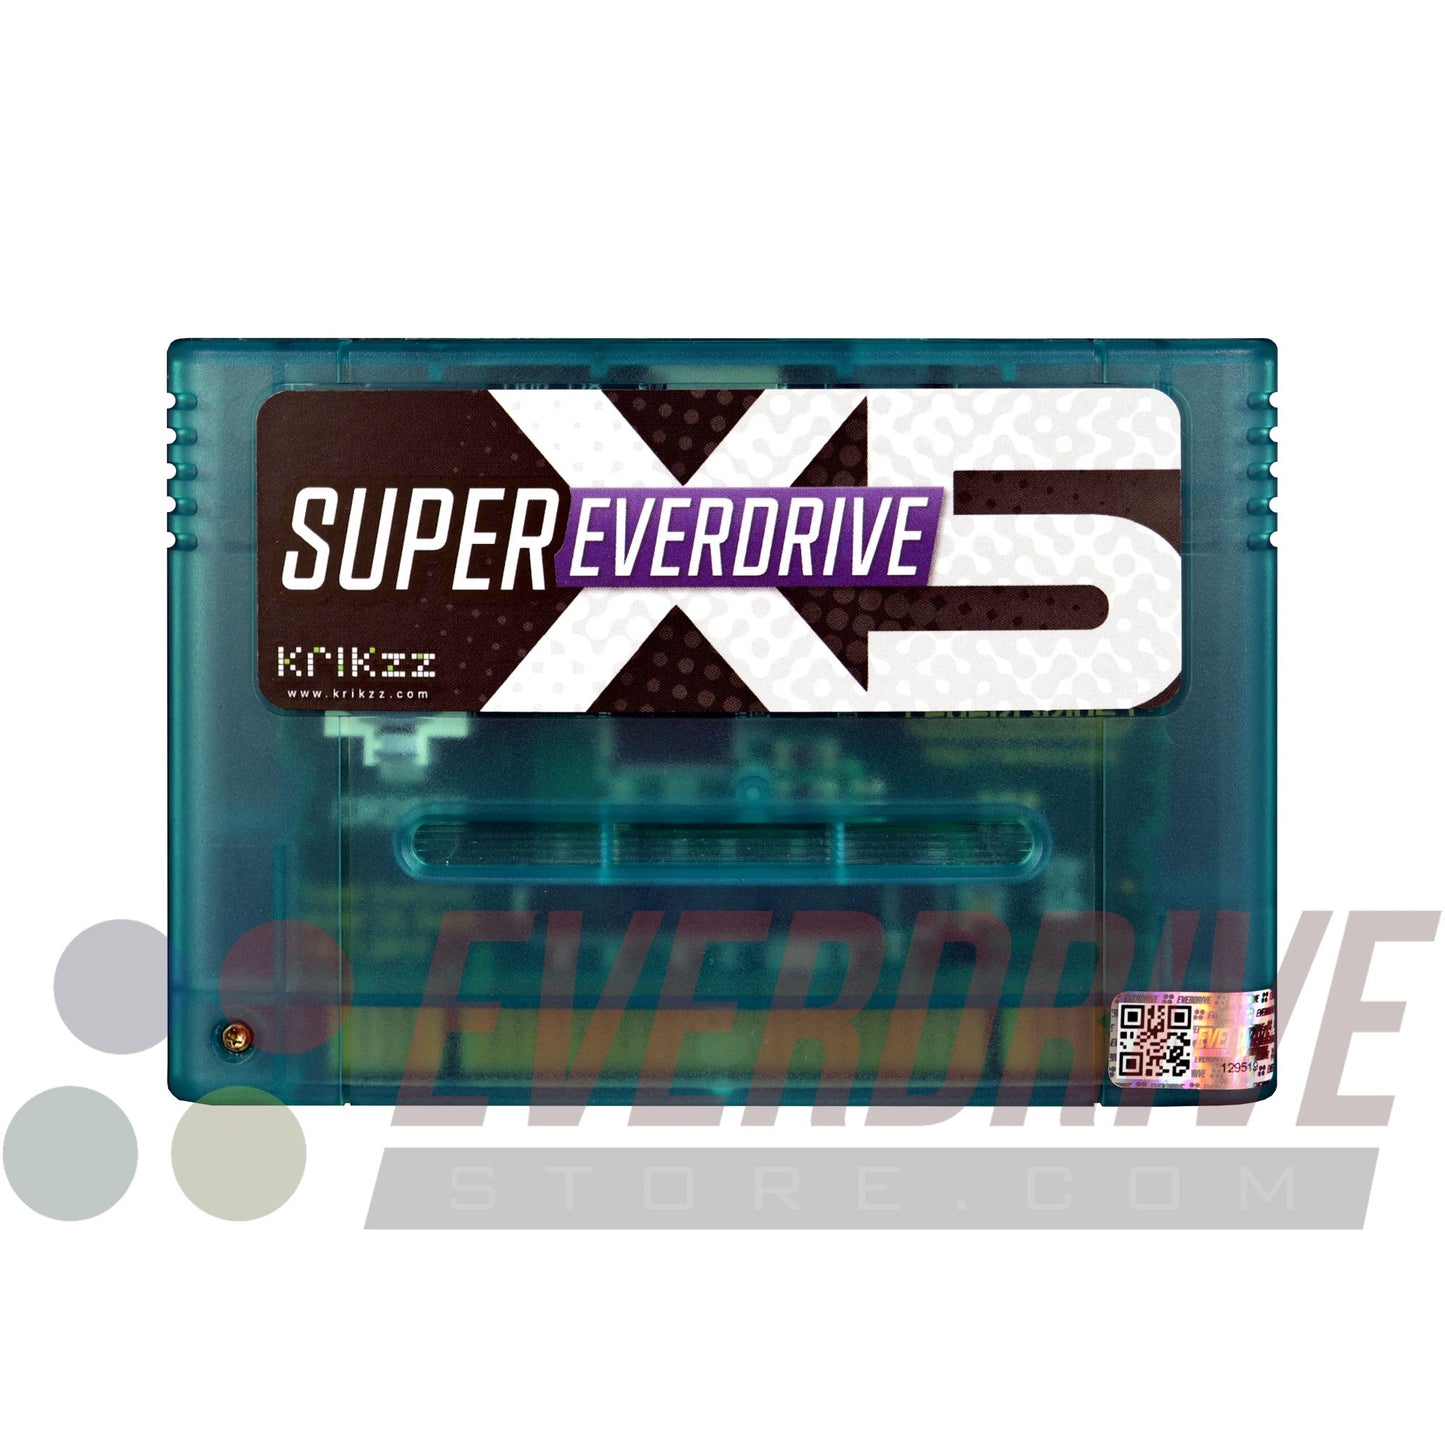 Super Everdrive X5 - Frosted Turquoise